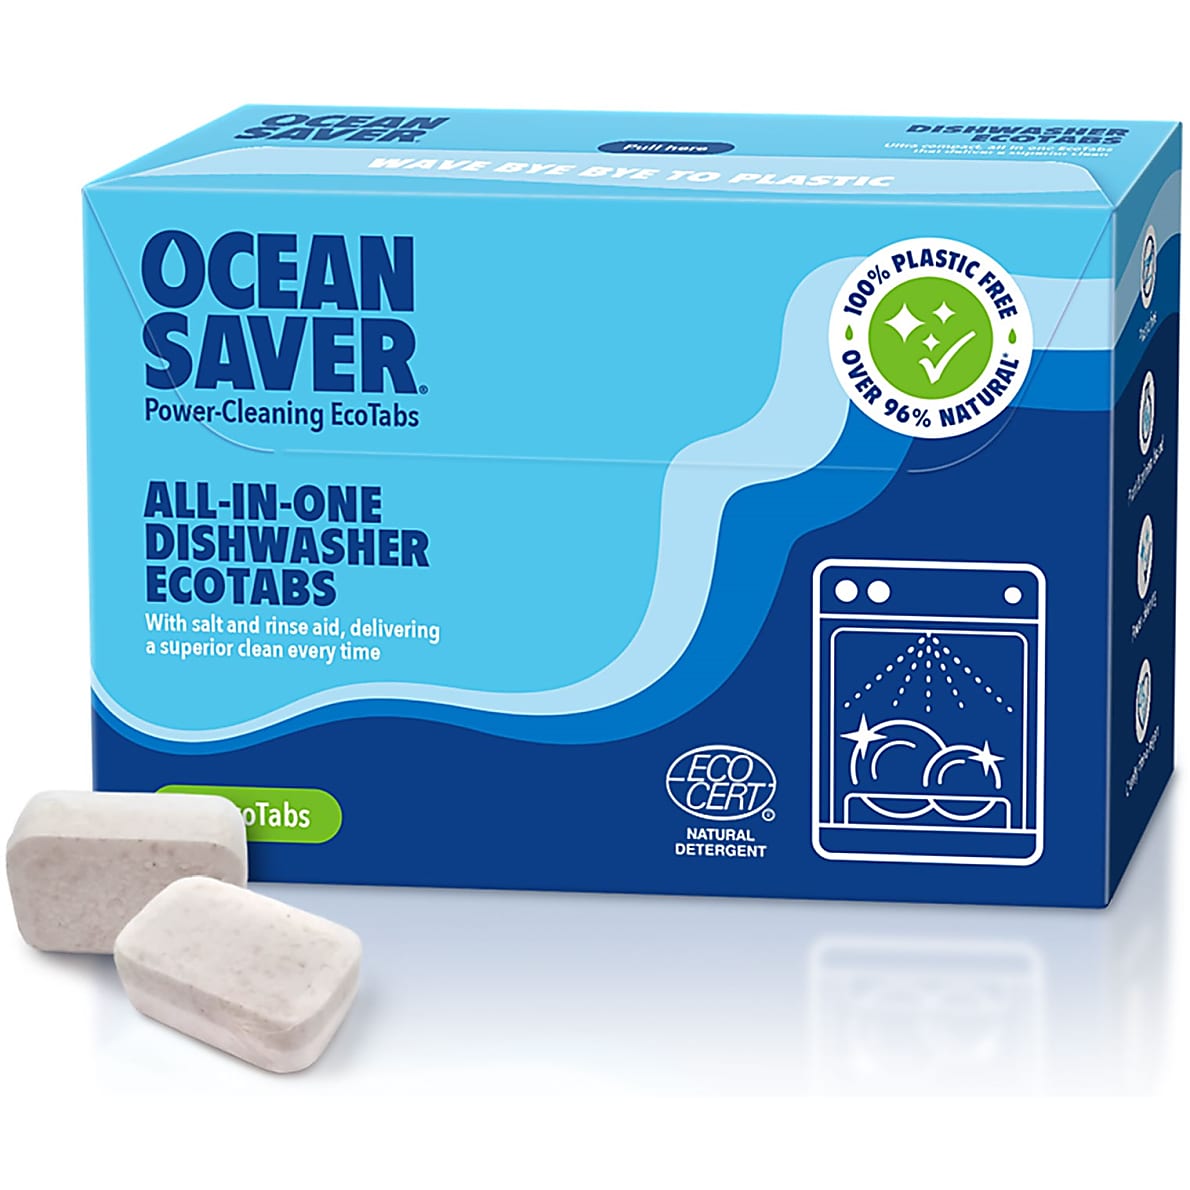 OceanSaver Powerful Dishwasher Cleaning Tabs for 30 washes